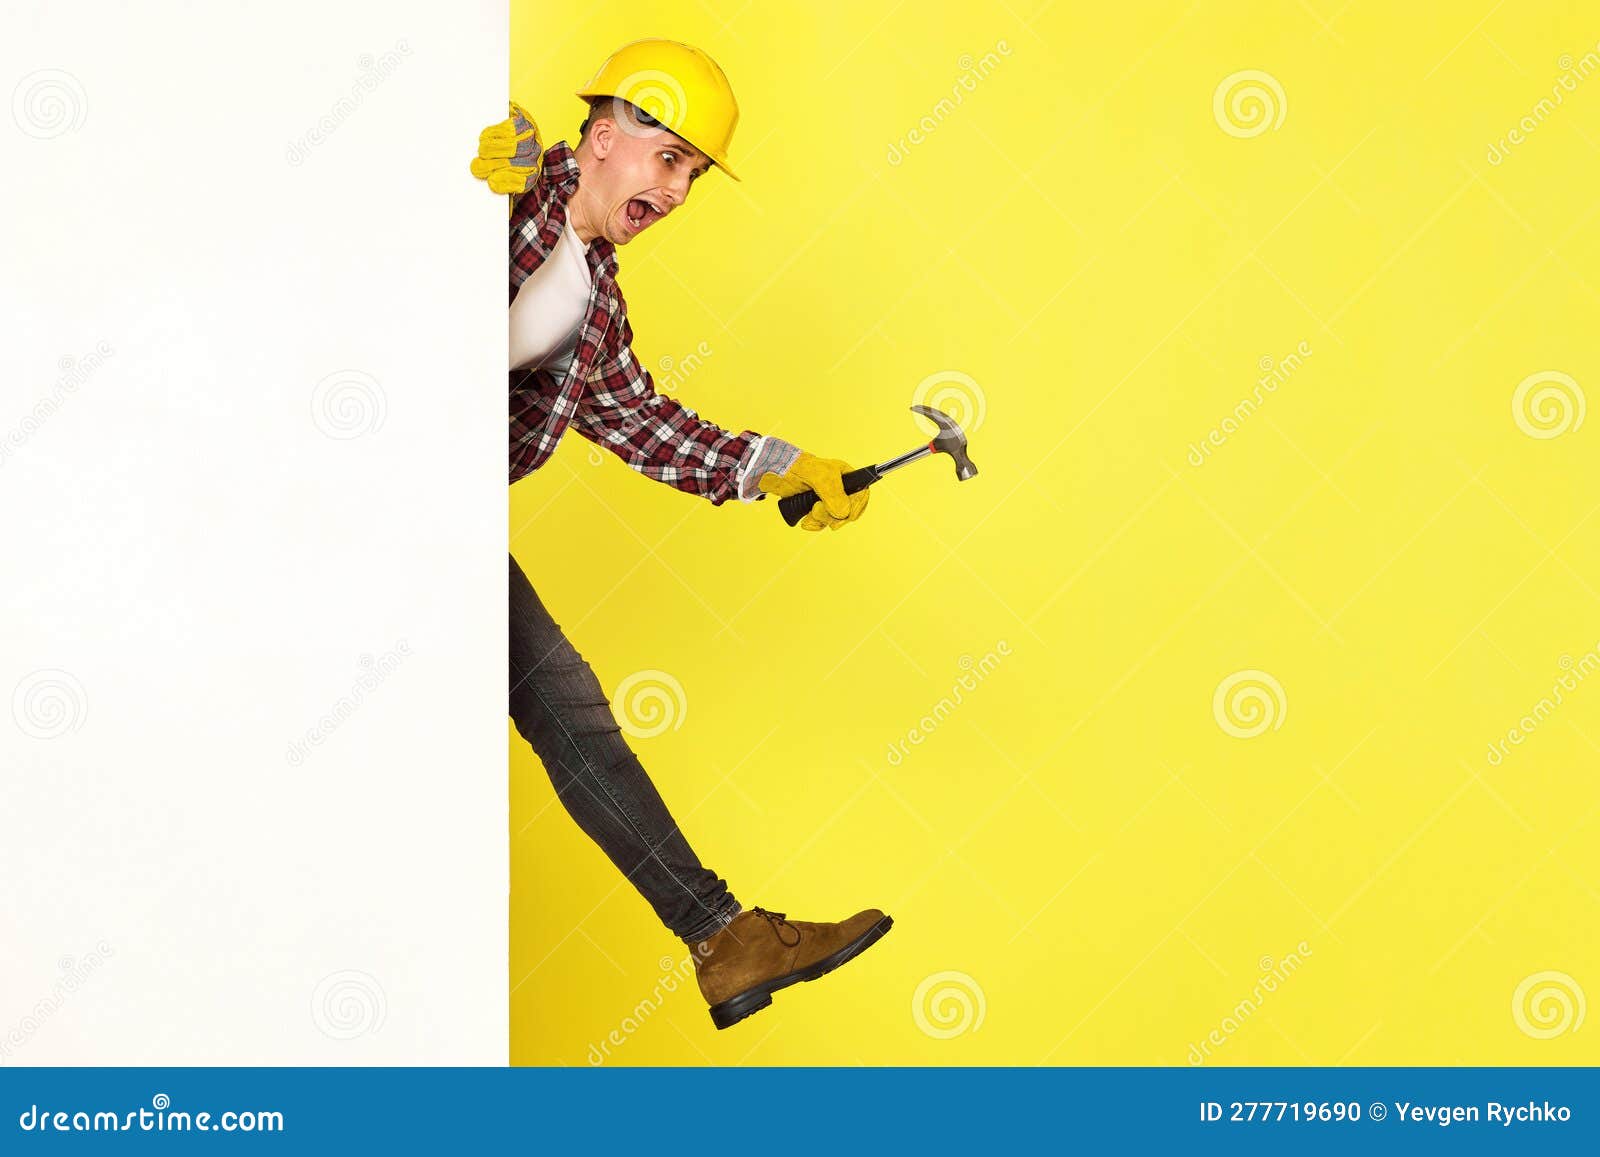 professional builder in work clothes in helmet holding hammer. professional builder in work clothes, helmet holds hammer and comes out from behind the banner. copy space for text